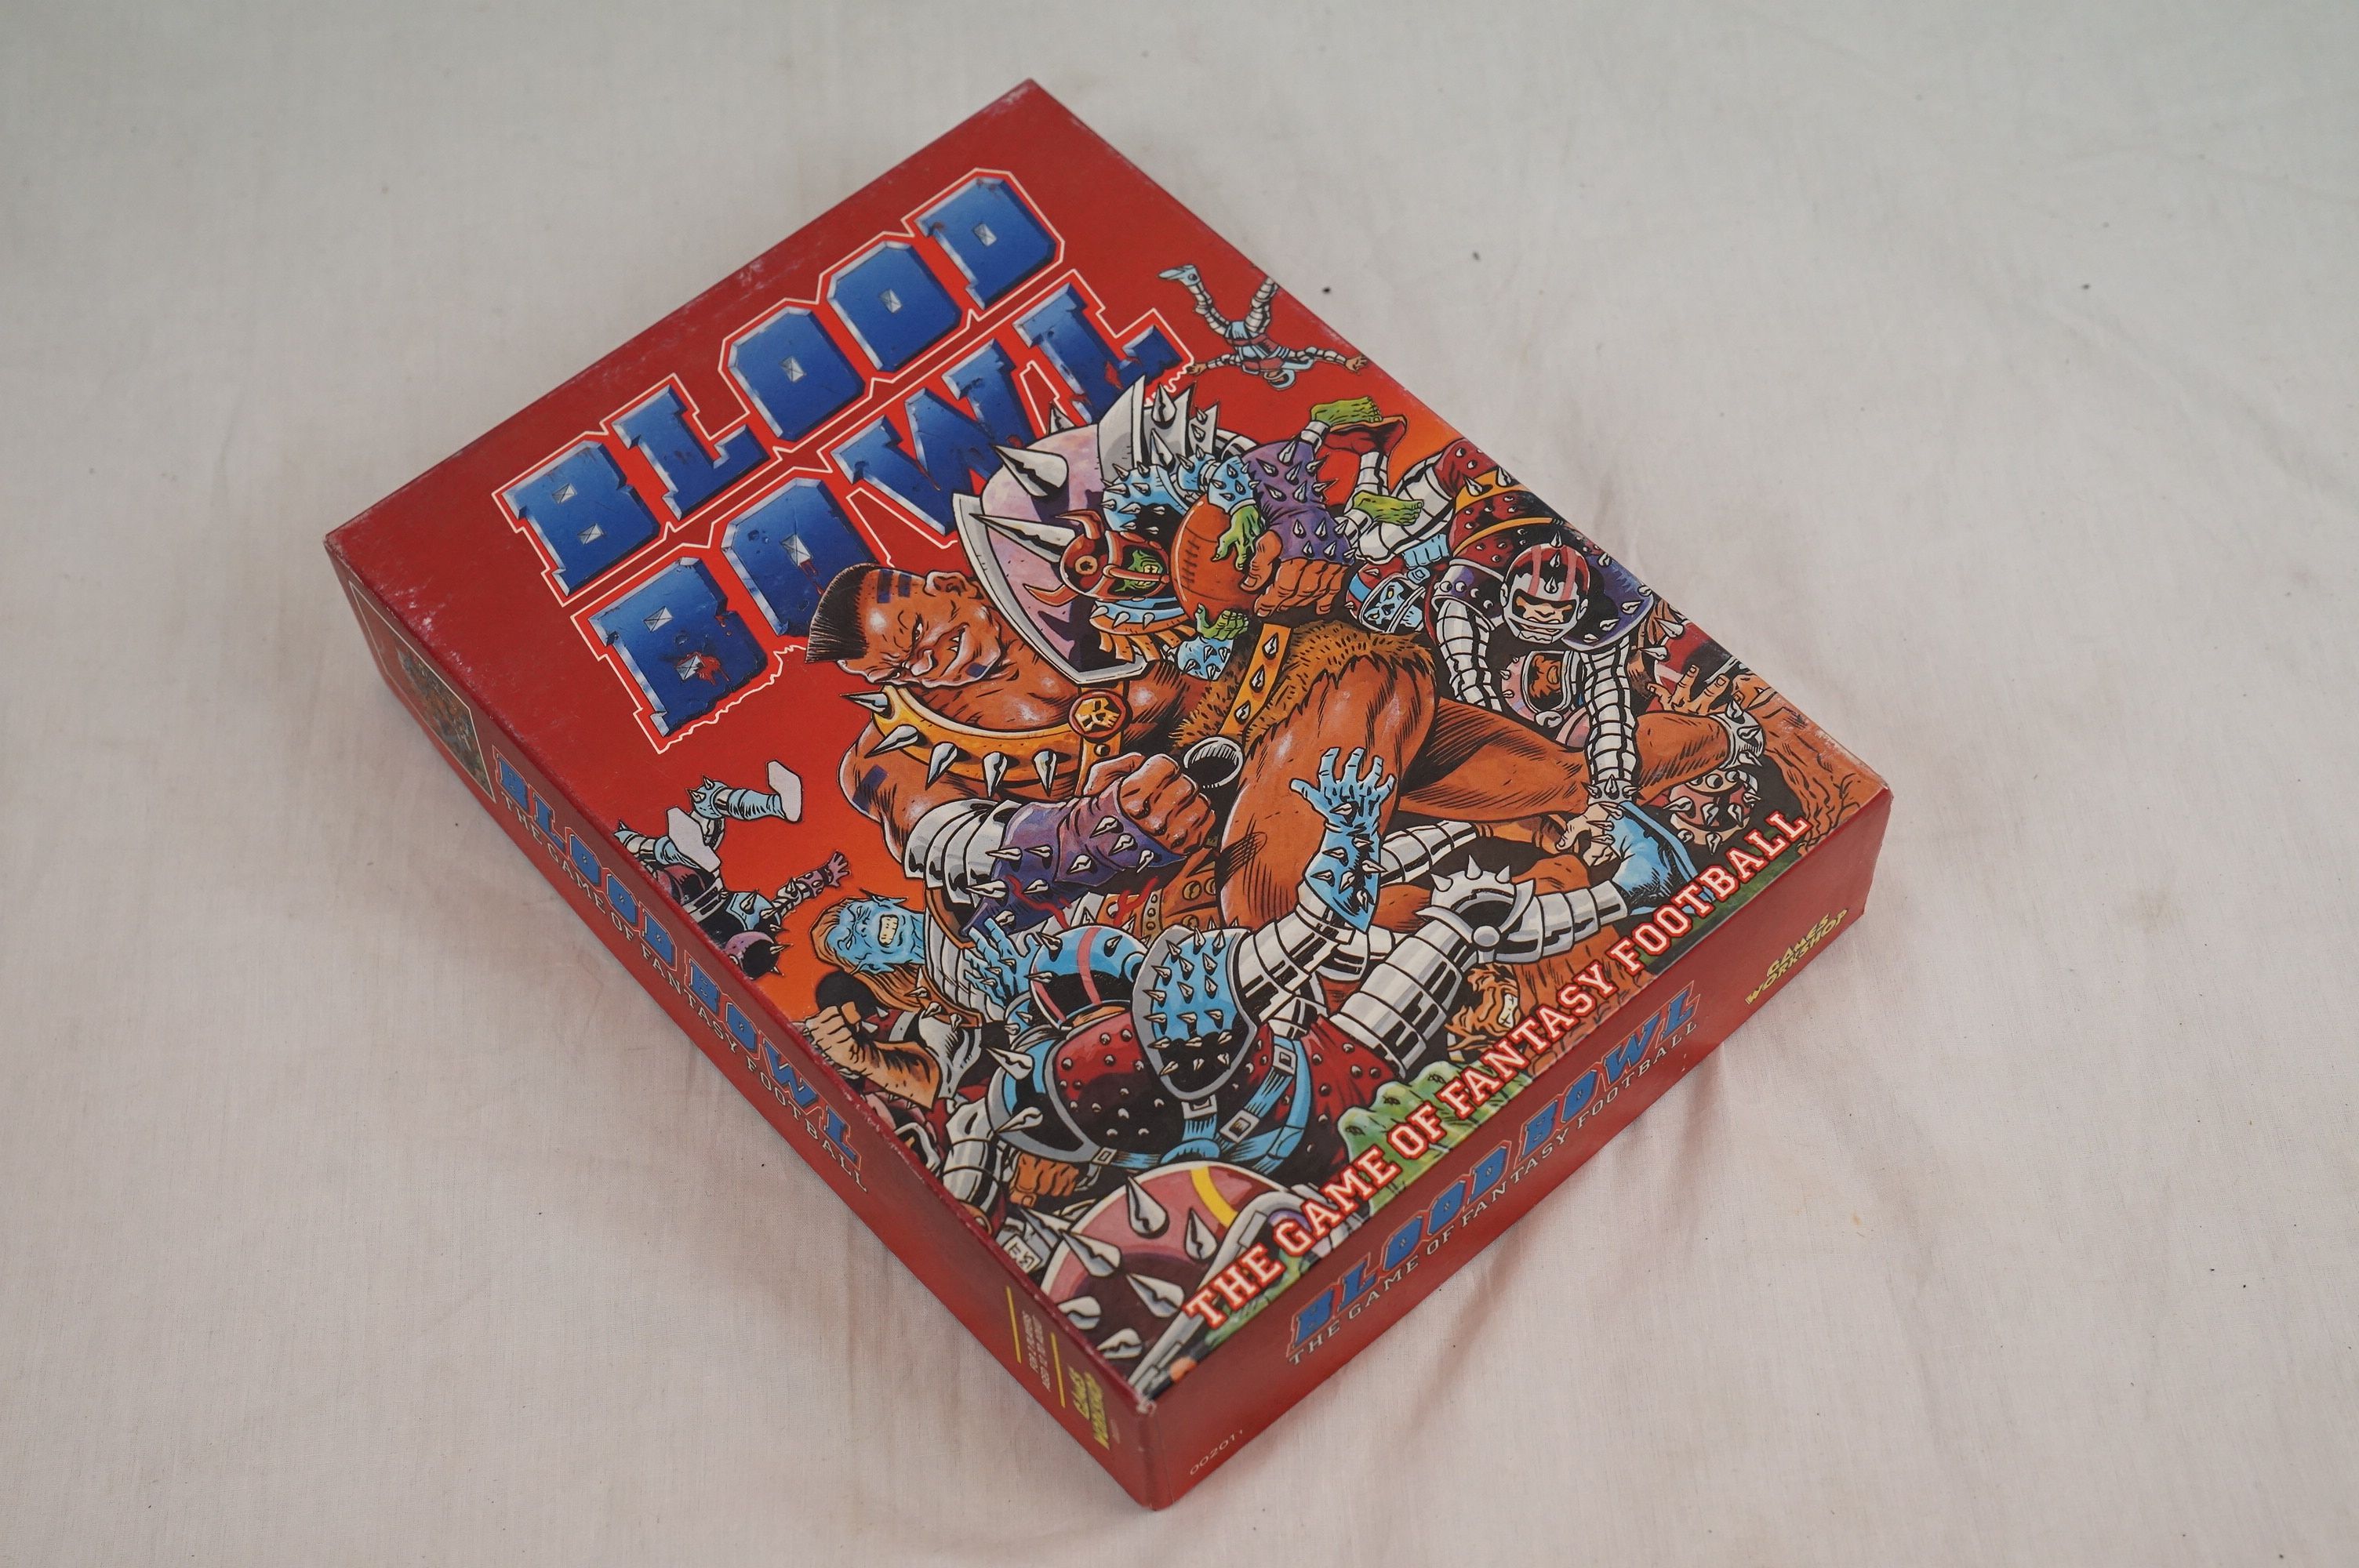 Six Games Workshop tabletop gaming sets to include Blood Bowl, Blood Bath at Orc's Drift, Warlock, - Image 2 of 8